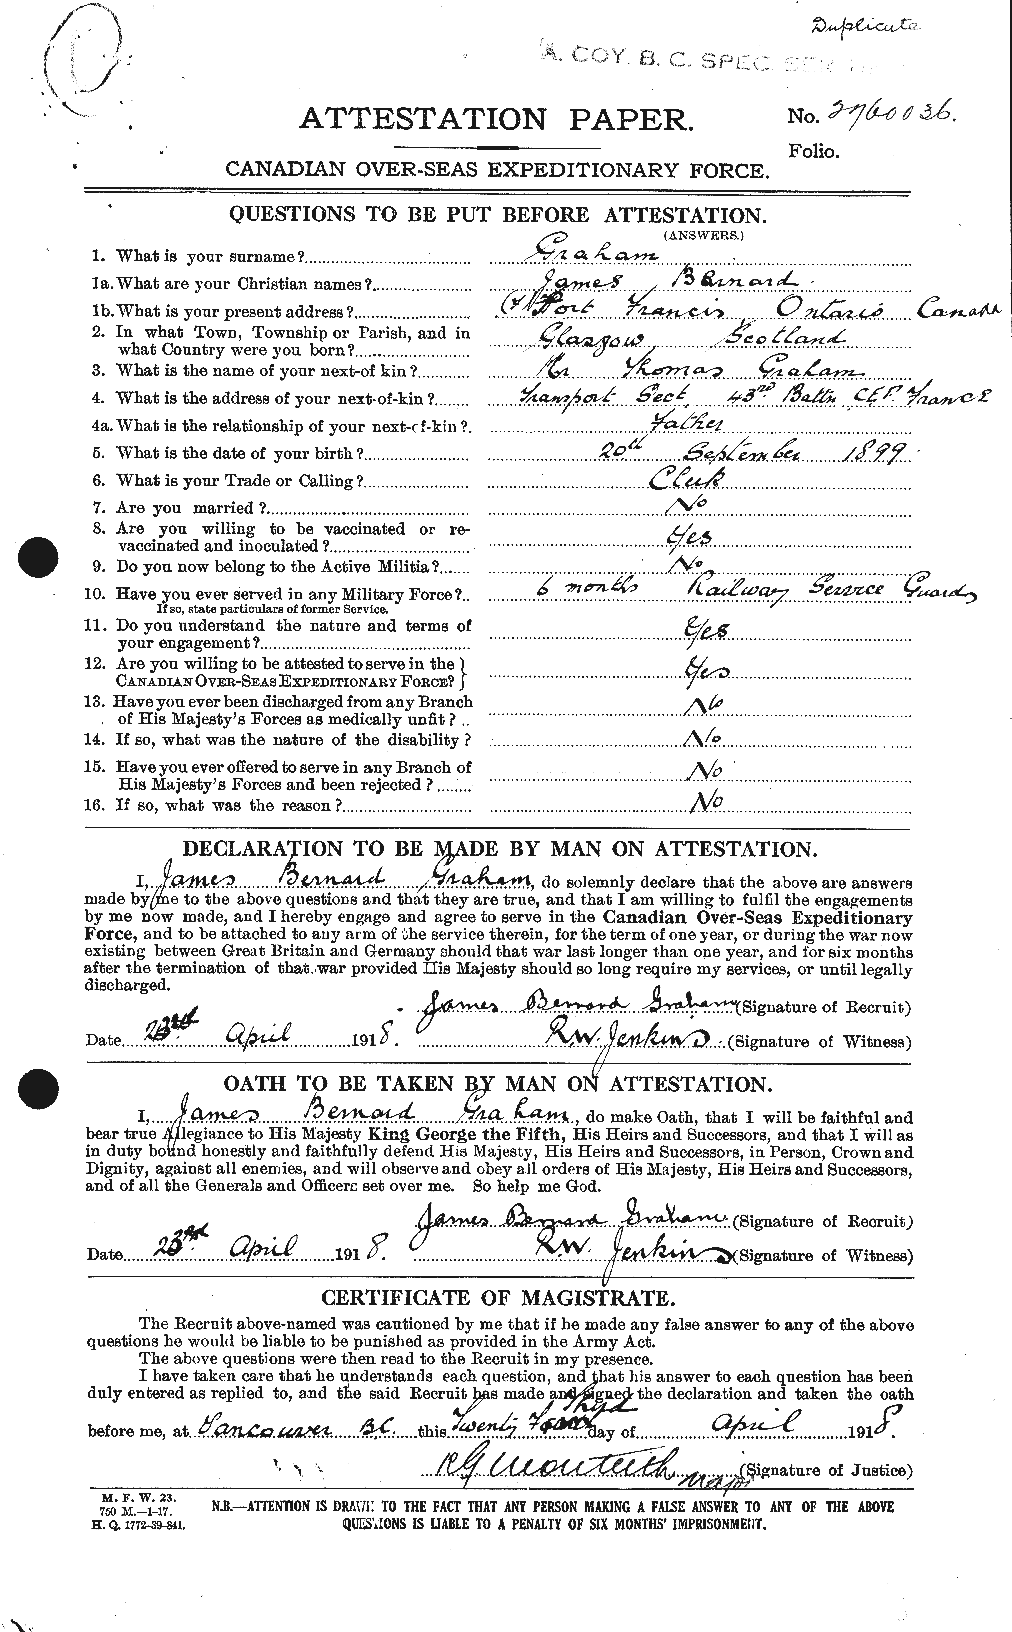 Personnel Records of the First World War - CEF 357807a